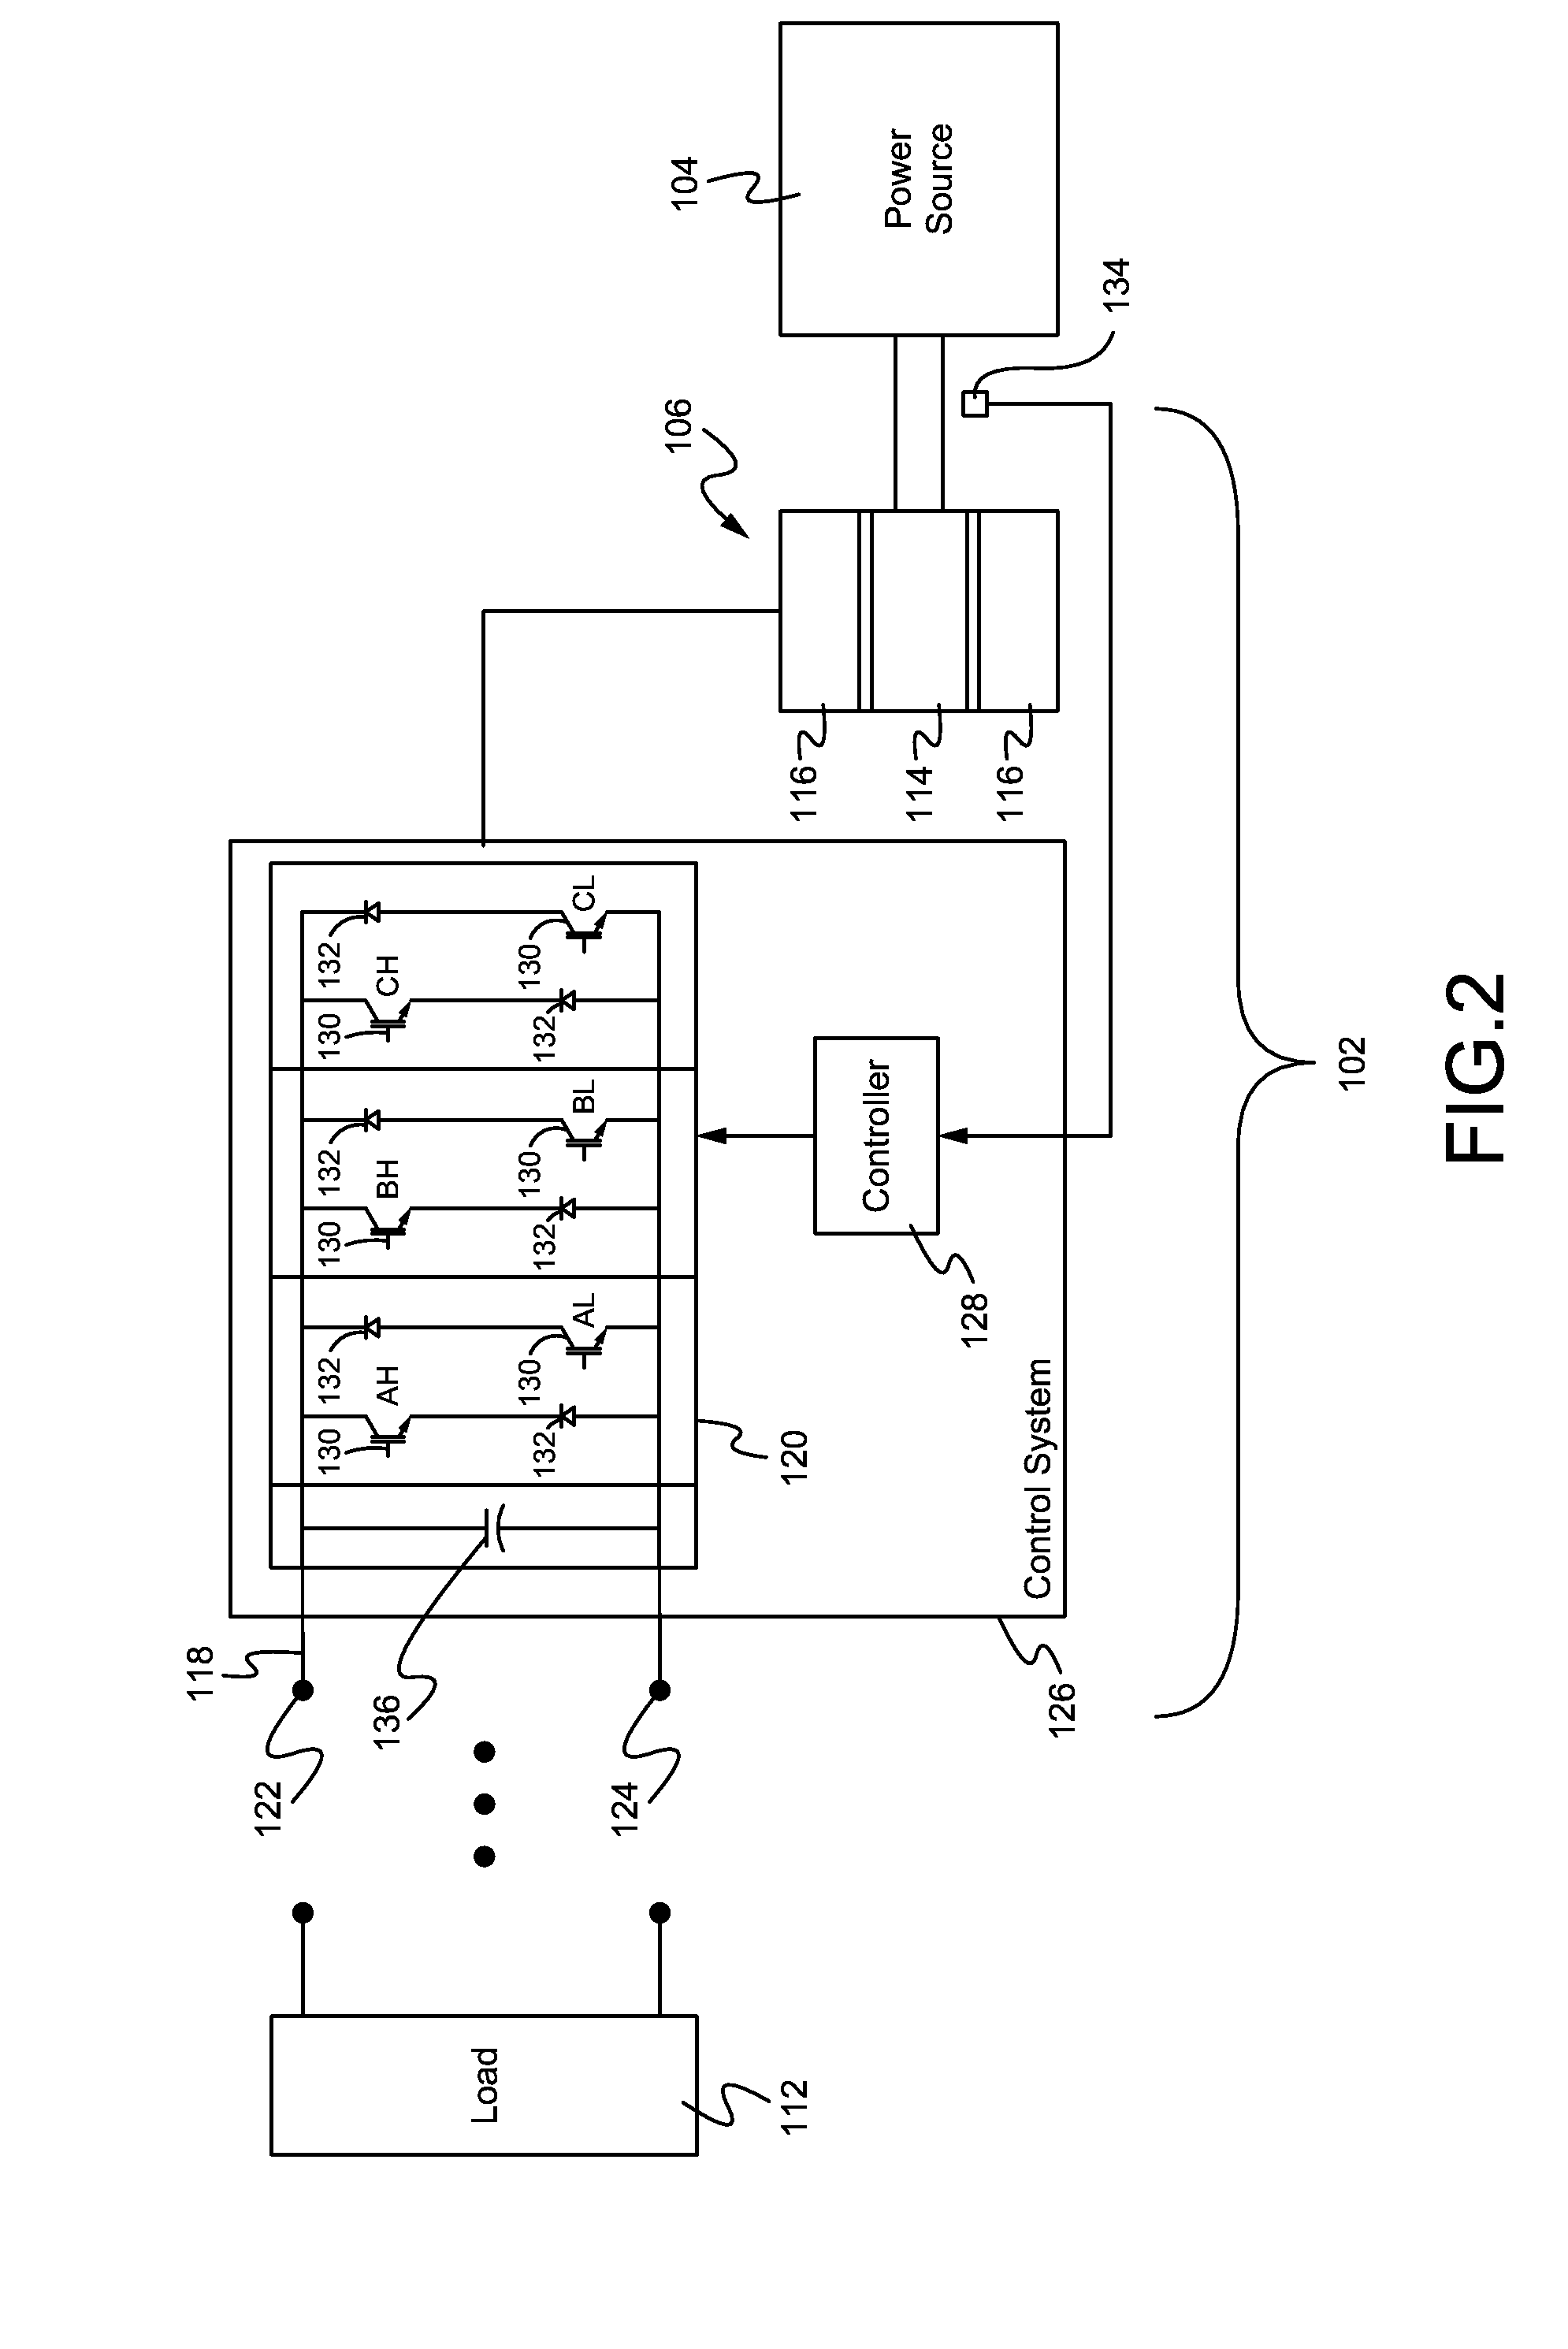 Hybrid Soft Switching for Current Regulation in Switched Reluctance Machines